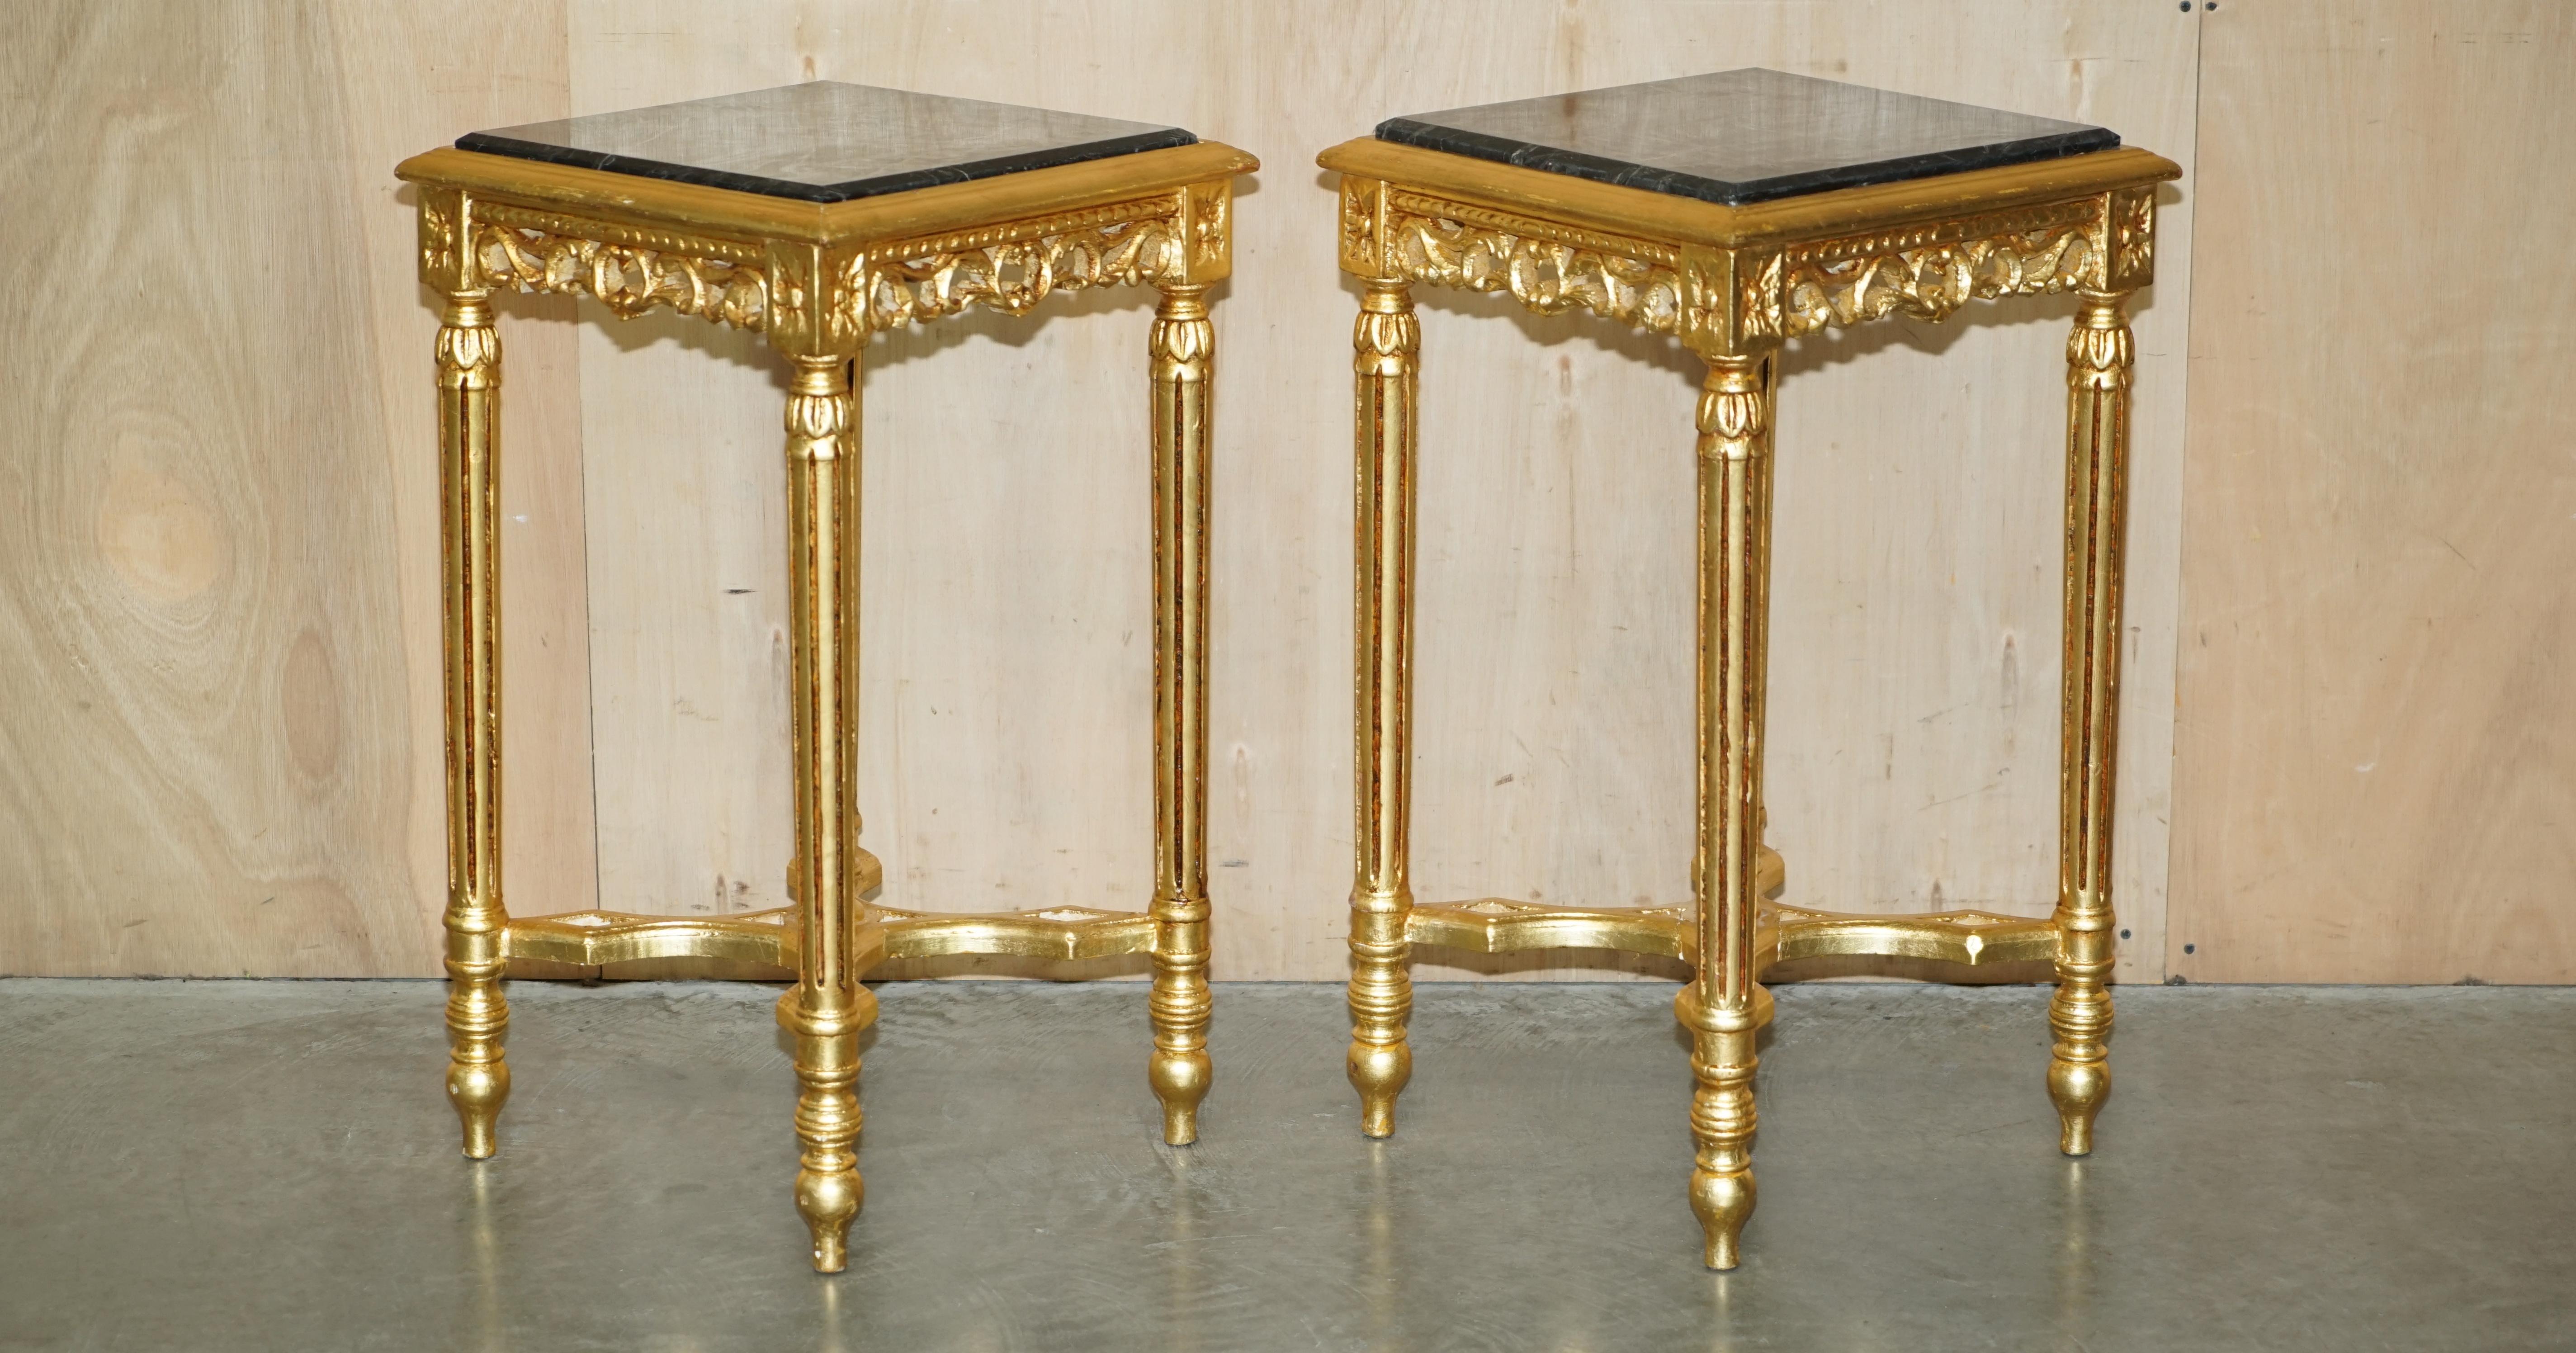 We are delighted to offer for sale this lovely original pair of circa 1880 Italian gold gilt wood marble topped side tables.

A totally original pair, the hardwood frames have been nicely gold gilt, they have aged and worn as you would expect